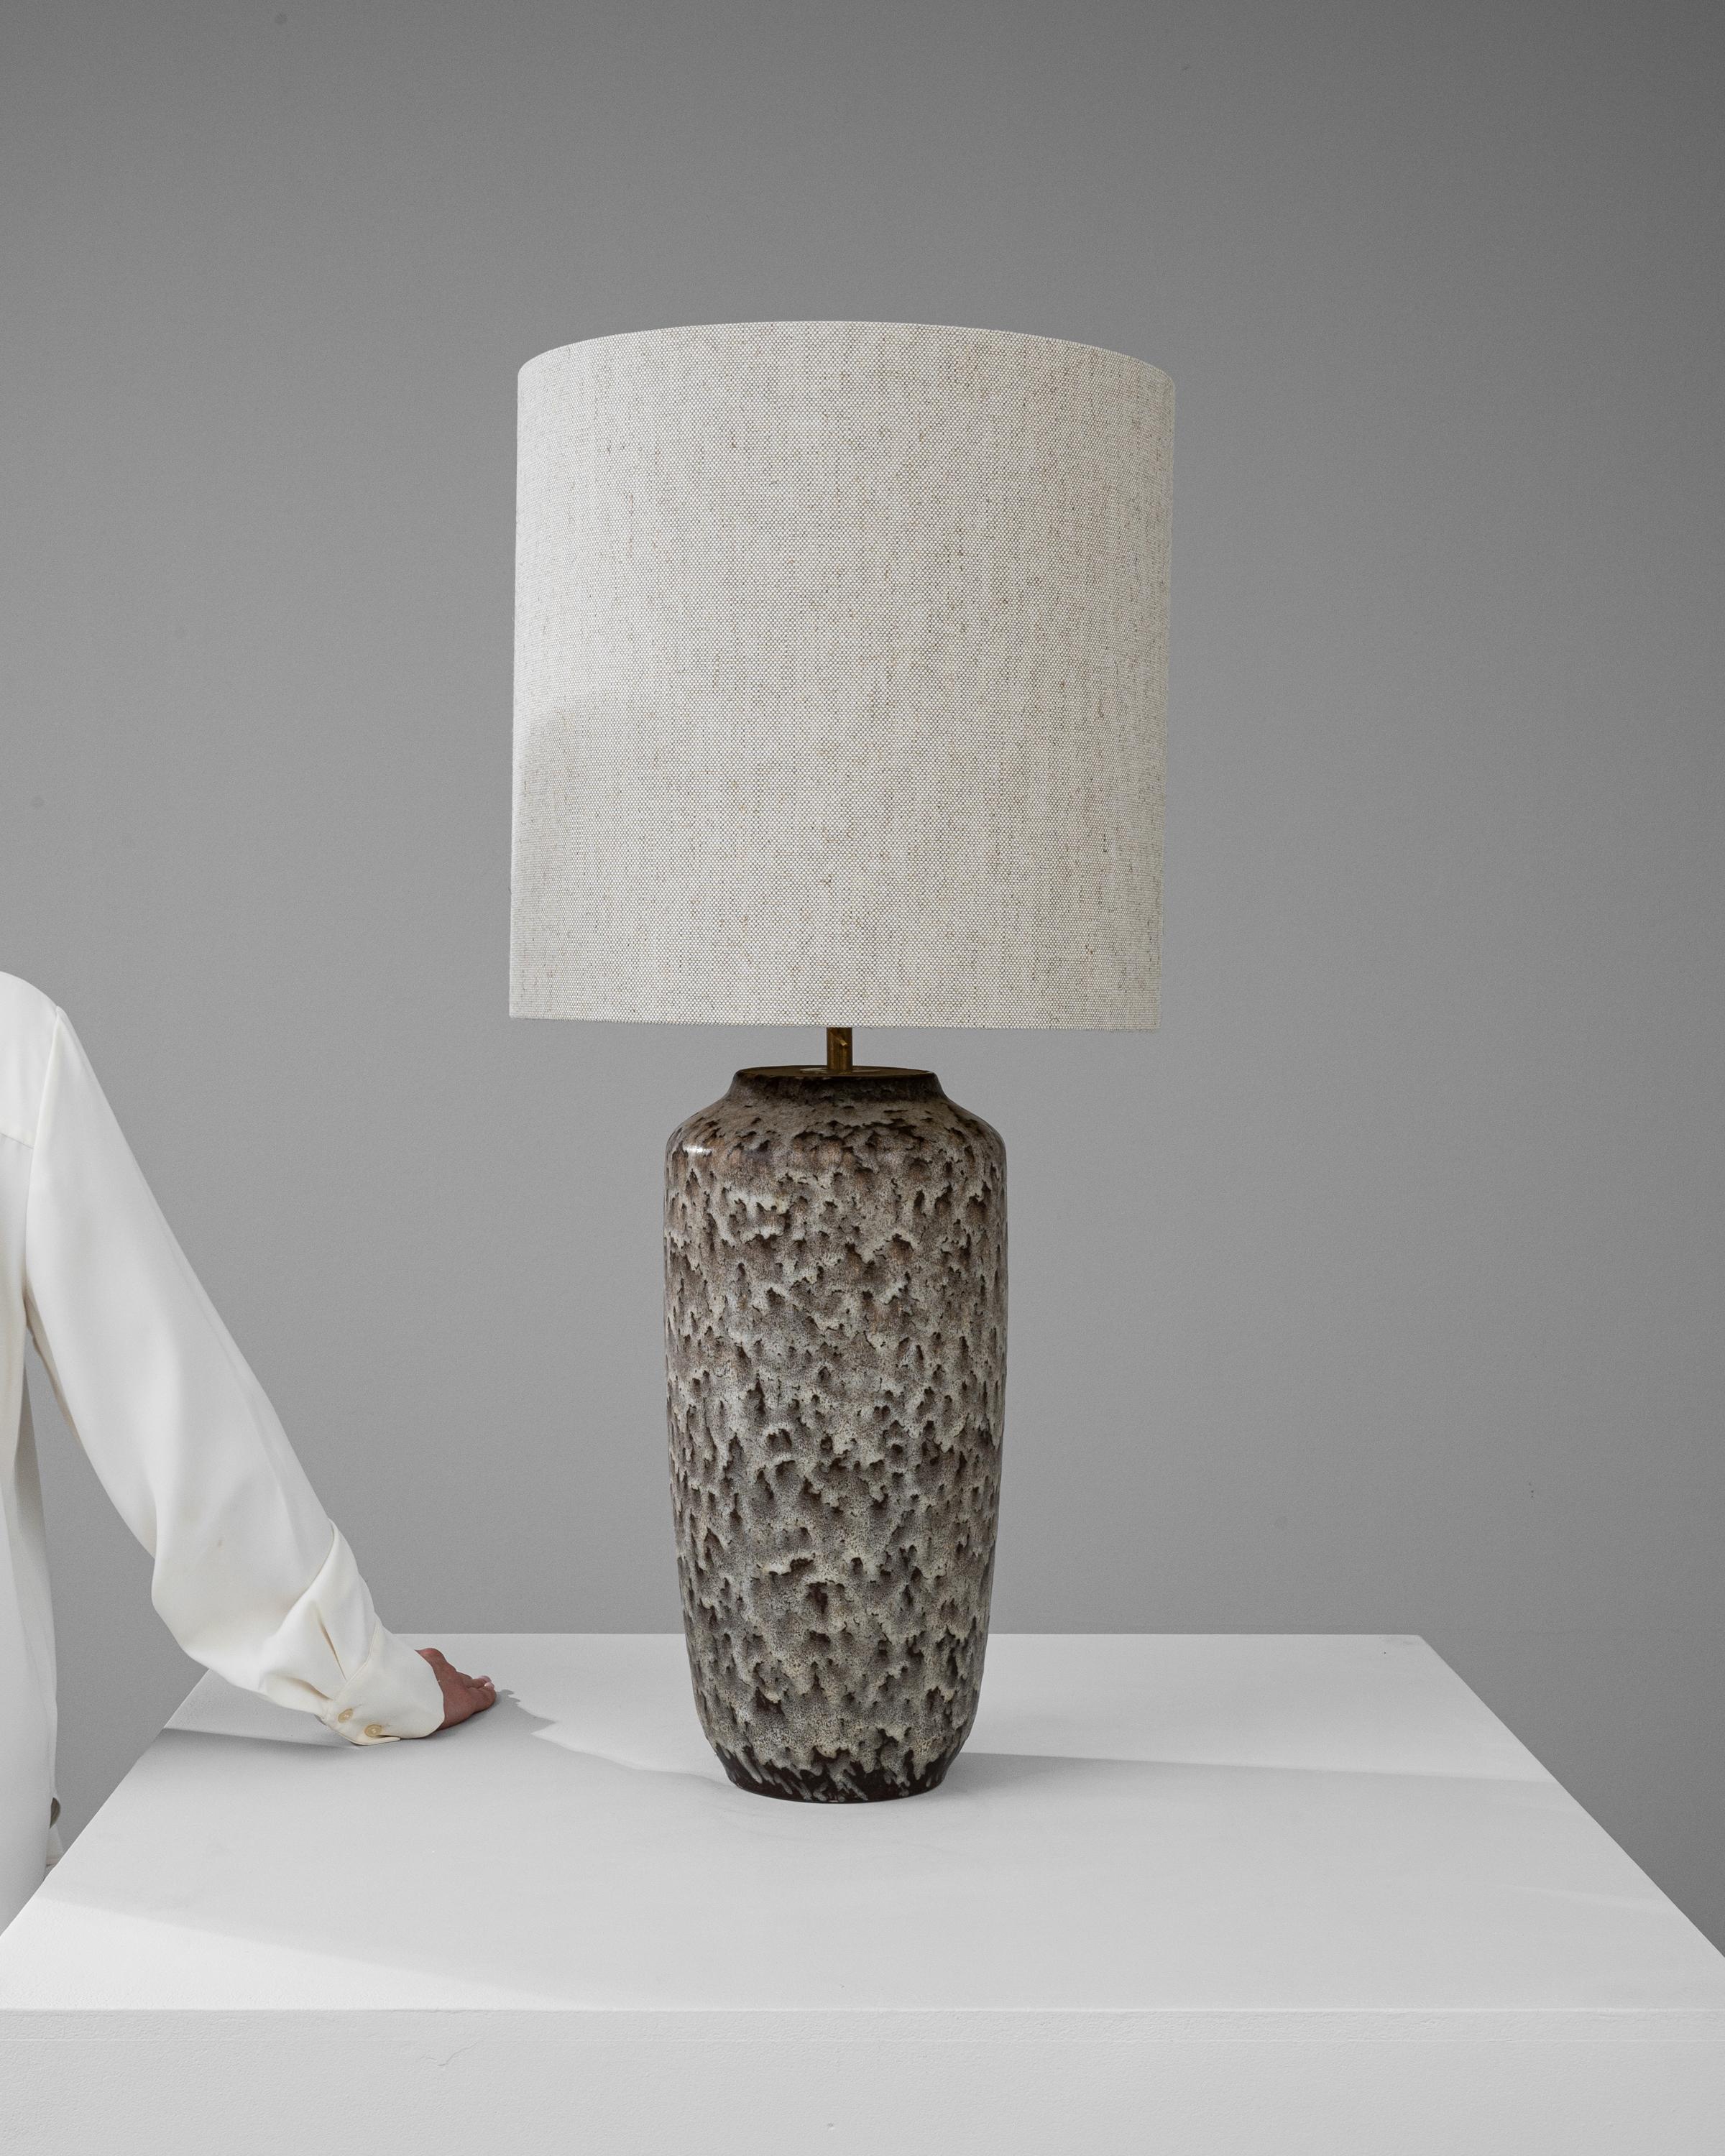 This 20th Century German Ceramic Table Lamp is a masterpiece of texture and form, embodying a rugged natural beauty. The cylindrical base draws the eye with its pitted surface, akin to the surface of a timeworn stone, creating an intriguing tactile